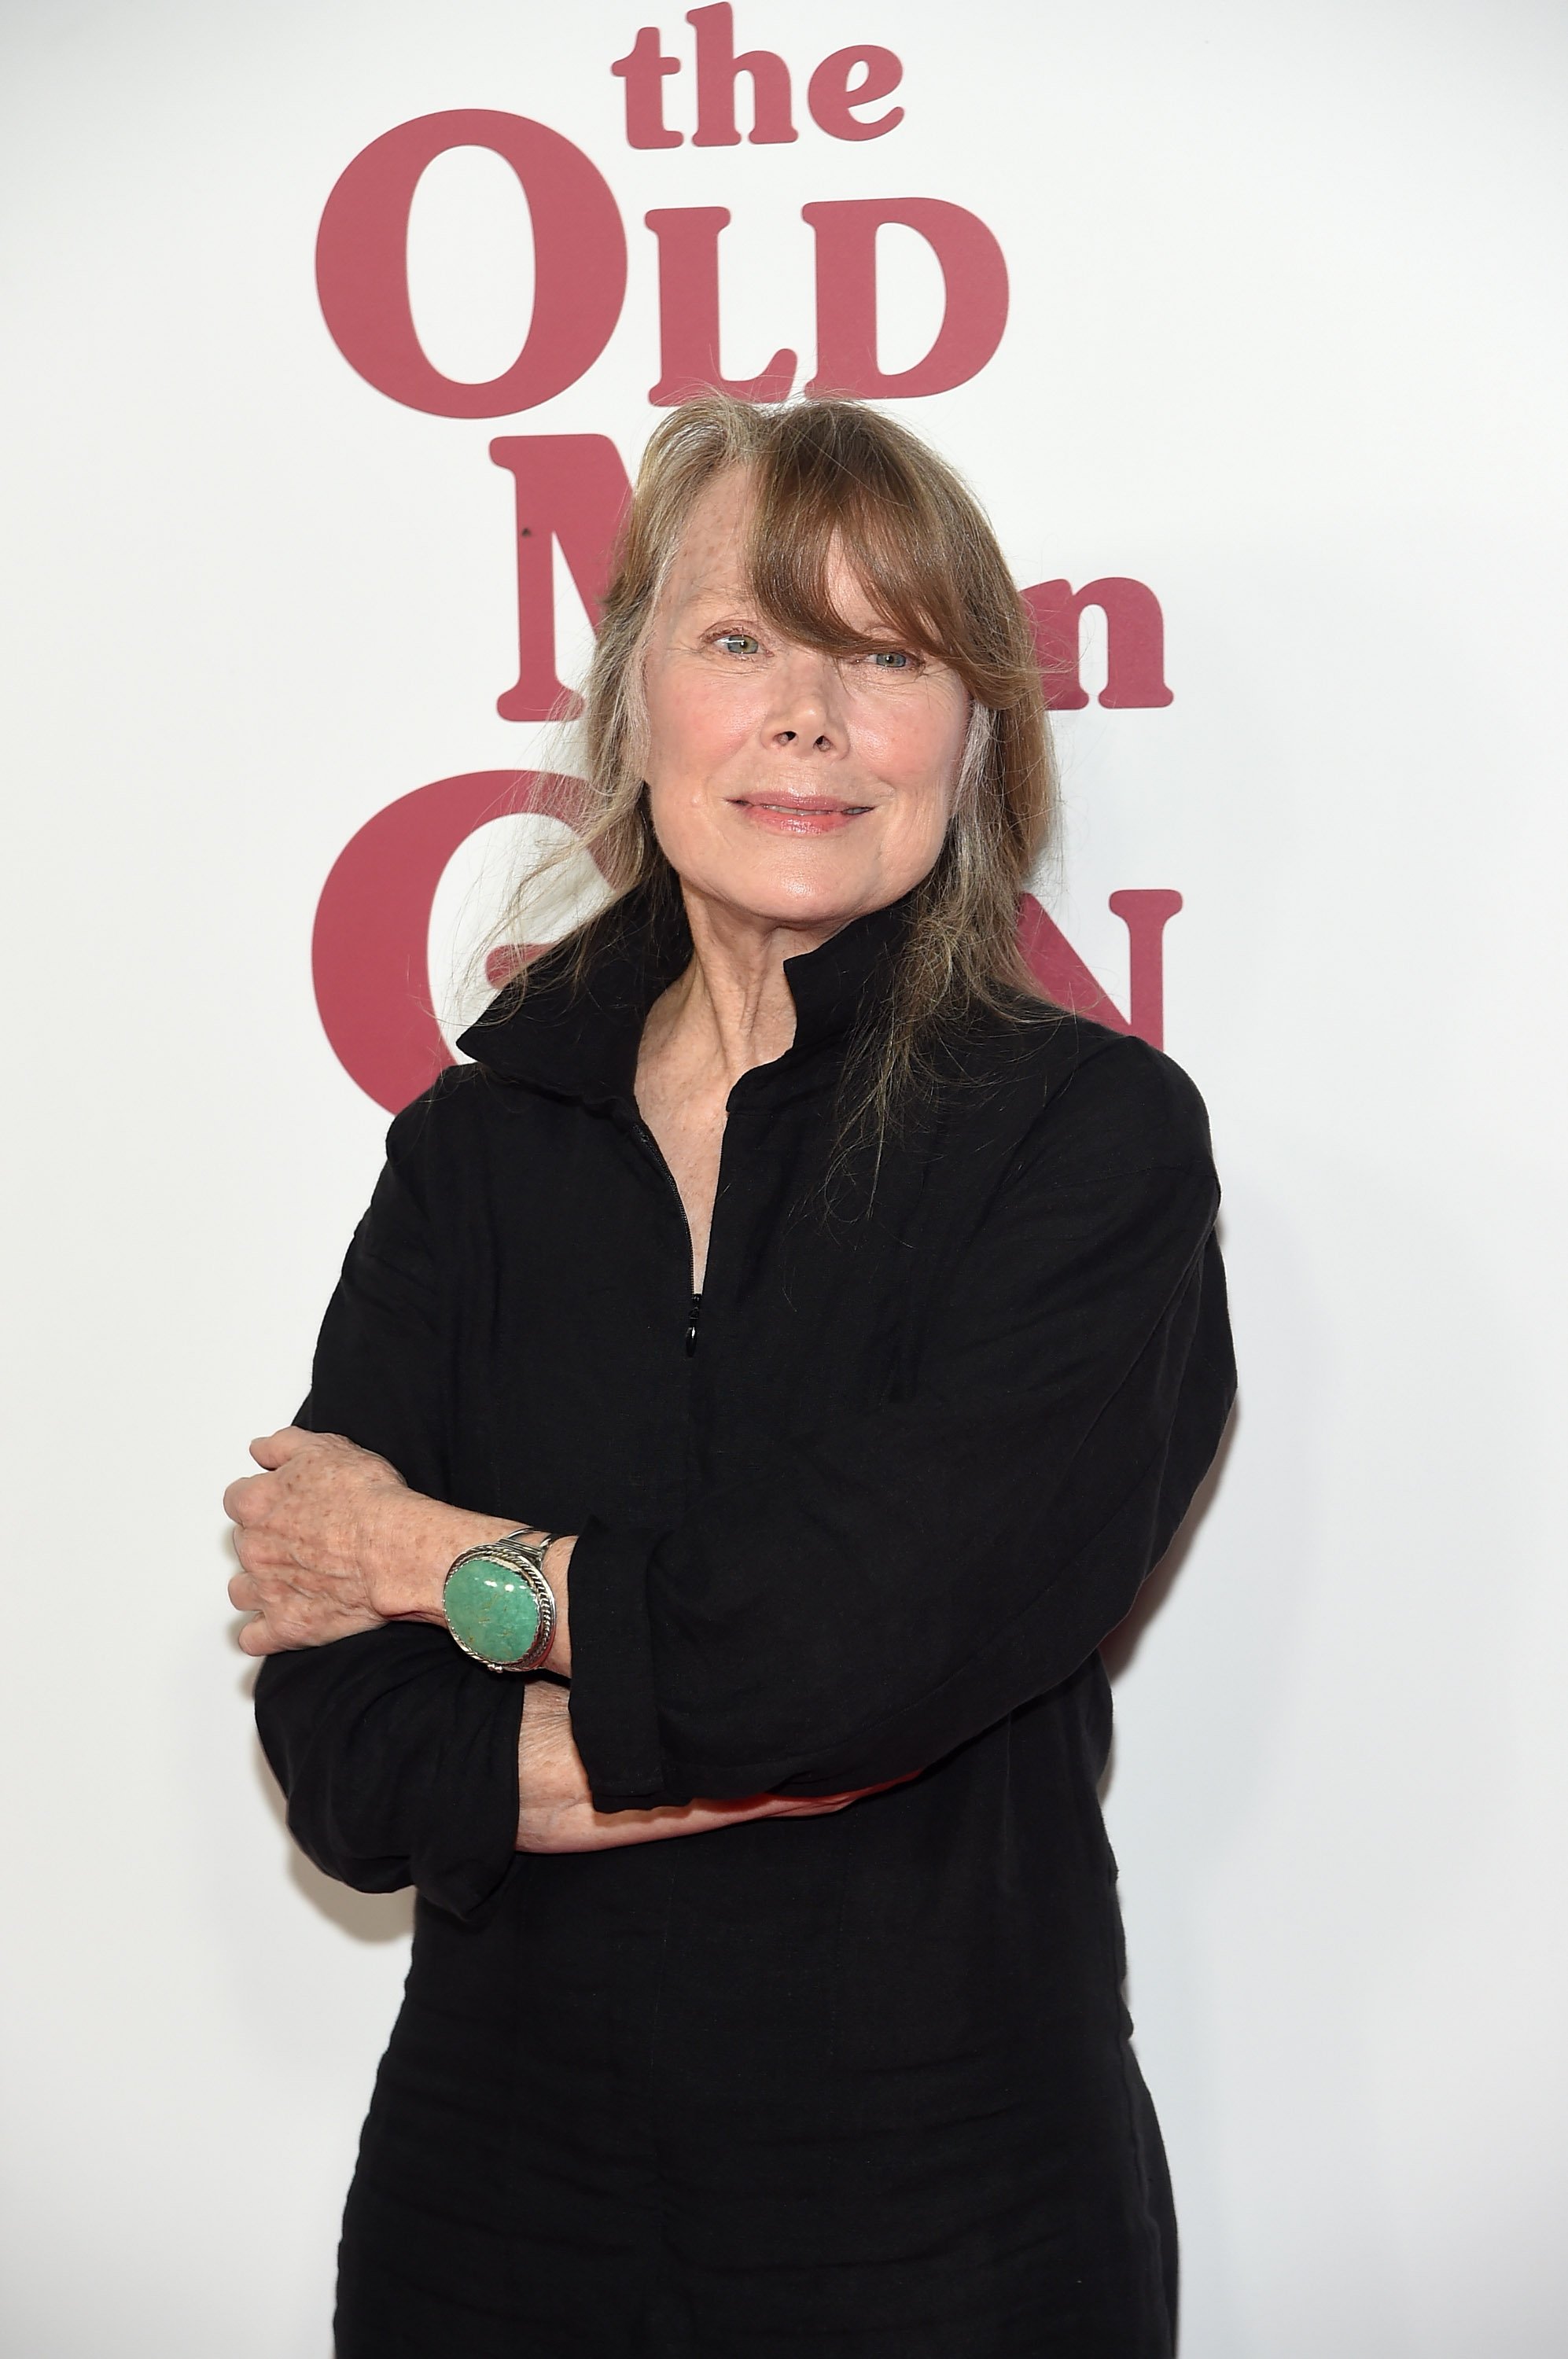  Sissy Spacek attends the "The Old Man & The Gun" premiere at Paris Theatre on September 20, 2018 | Source: Getty Images